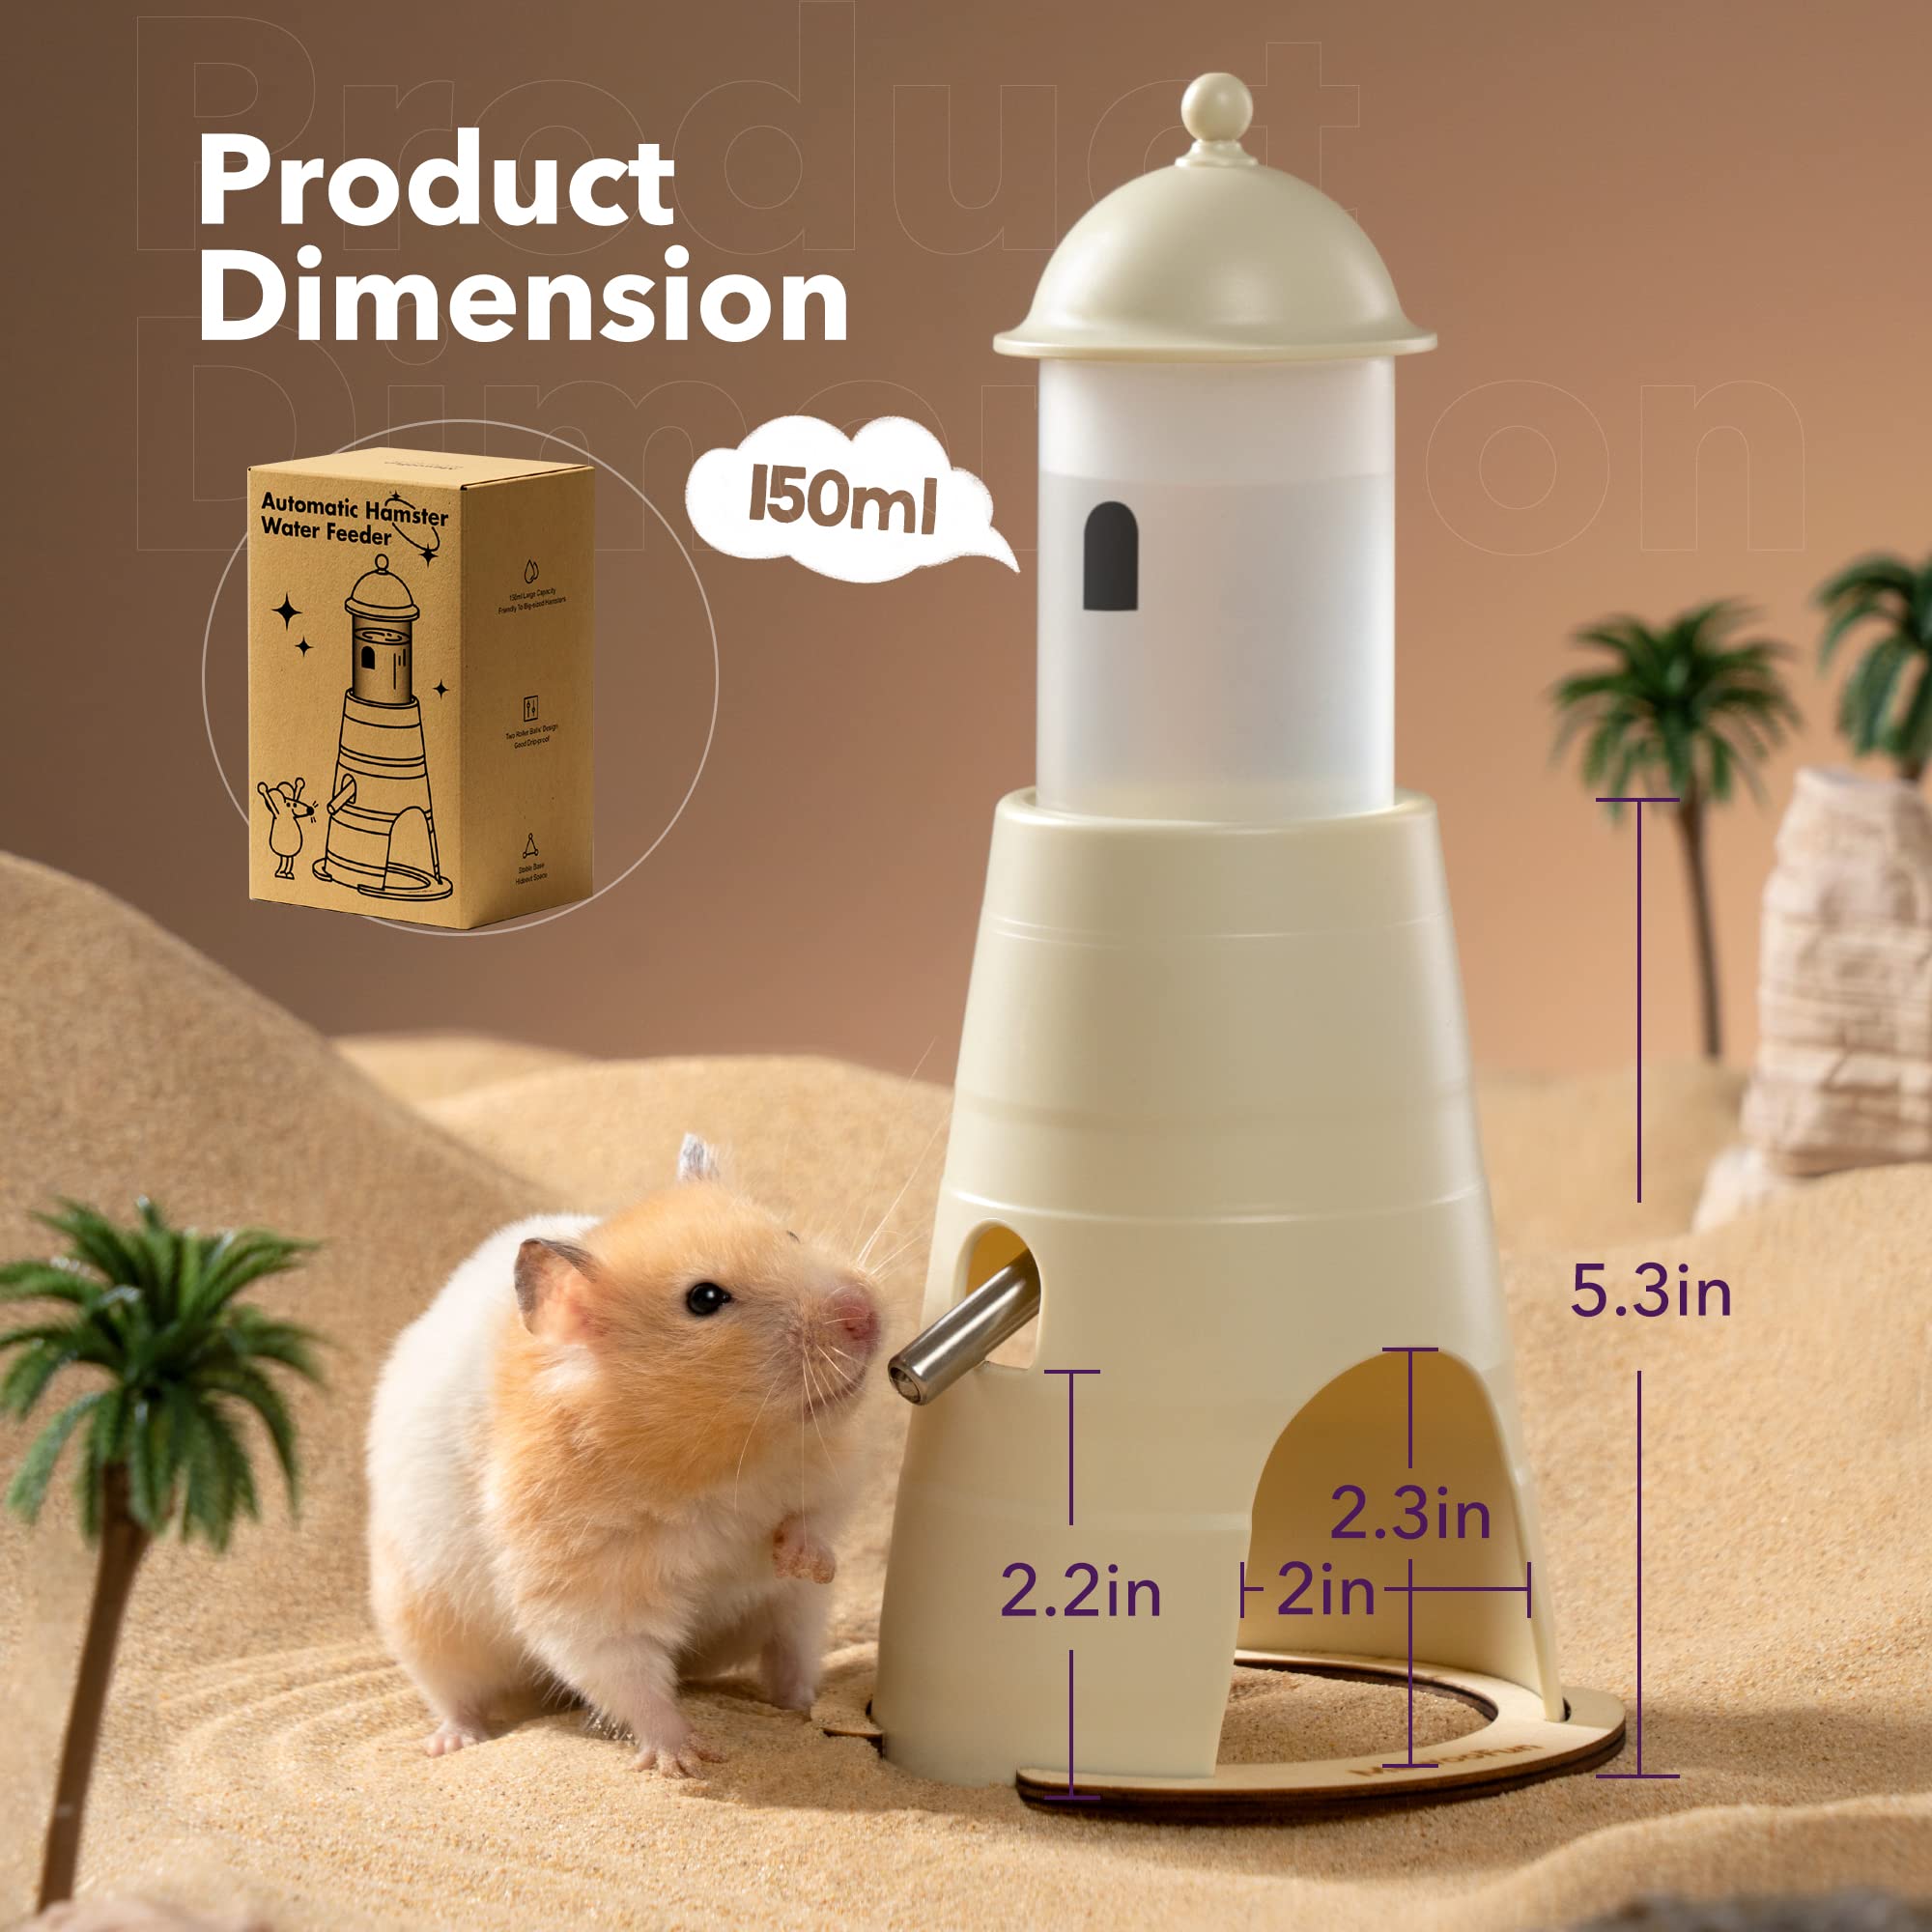 Hamster Water Bottle is a must-have for your furry friend. This convenient and comfortable solution provides 150ml of water, a sturdy stand, and a hideout space for your dwarf hamsters or gerbils. Keep your pets happy and hydrated!